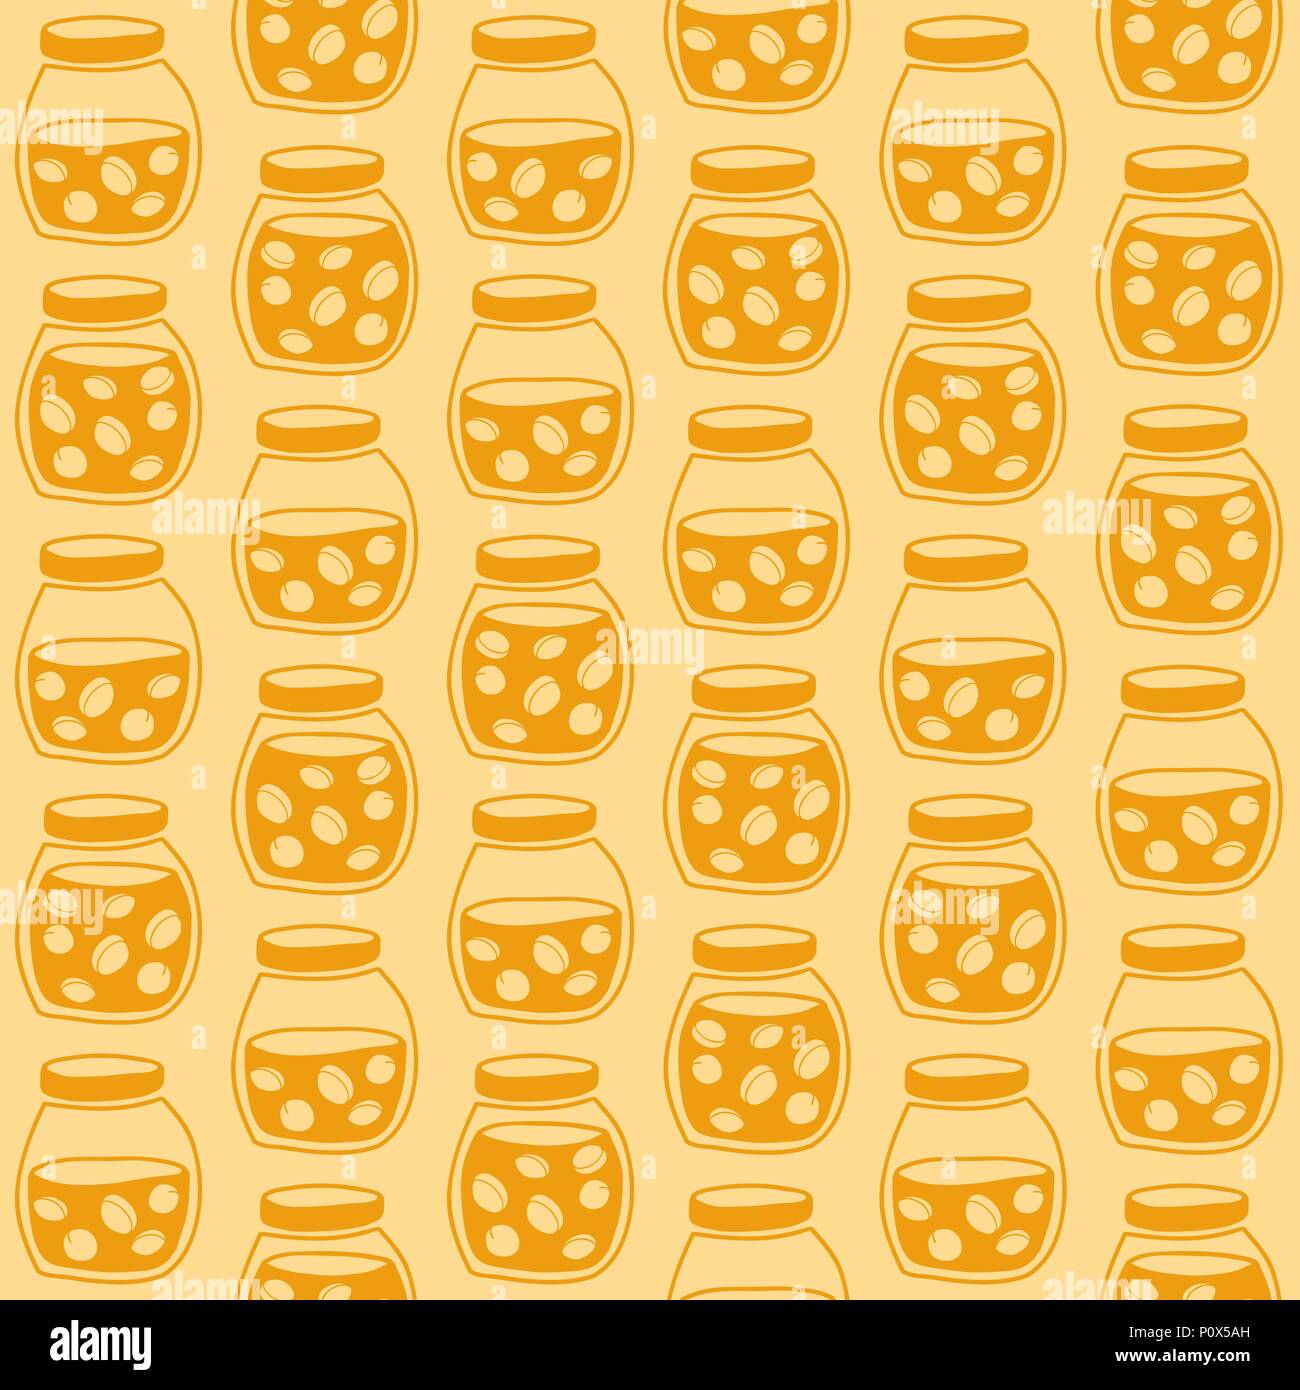 Bright seamless pattern with the apricot jam jars. Plain shadeless background with apricots for decoration or background. Stock Vector